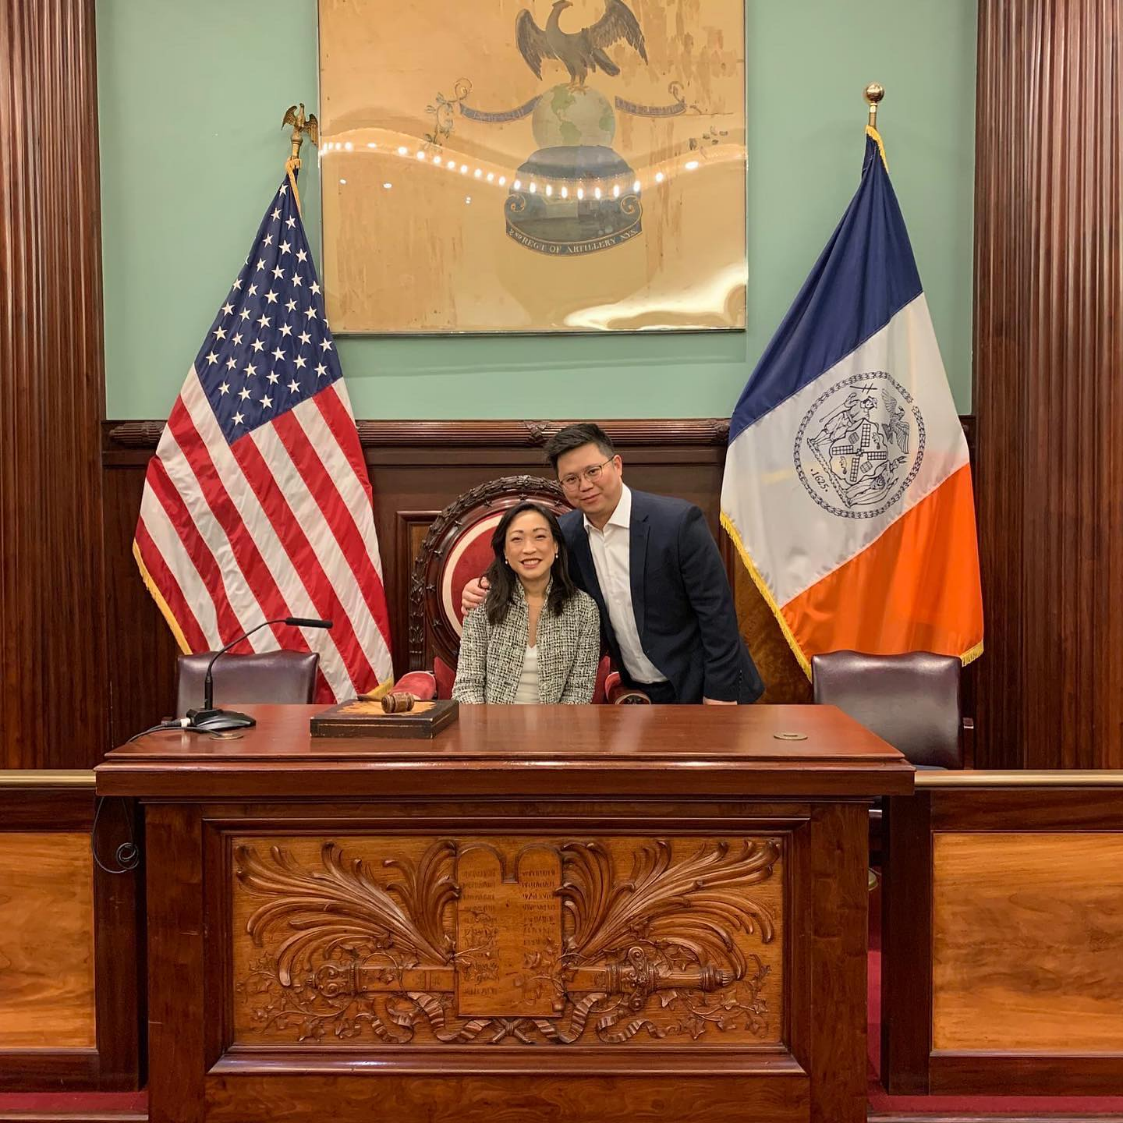 Linda Lee, Councilwoman of the City of New York (Source: Linda Lee’s Facebook page)